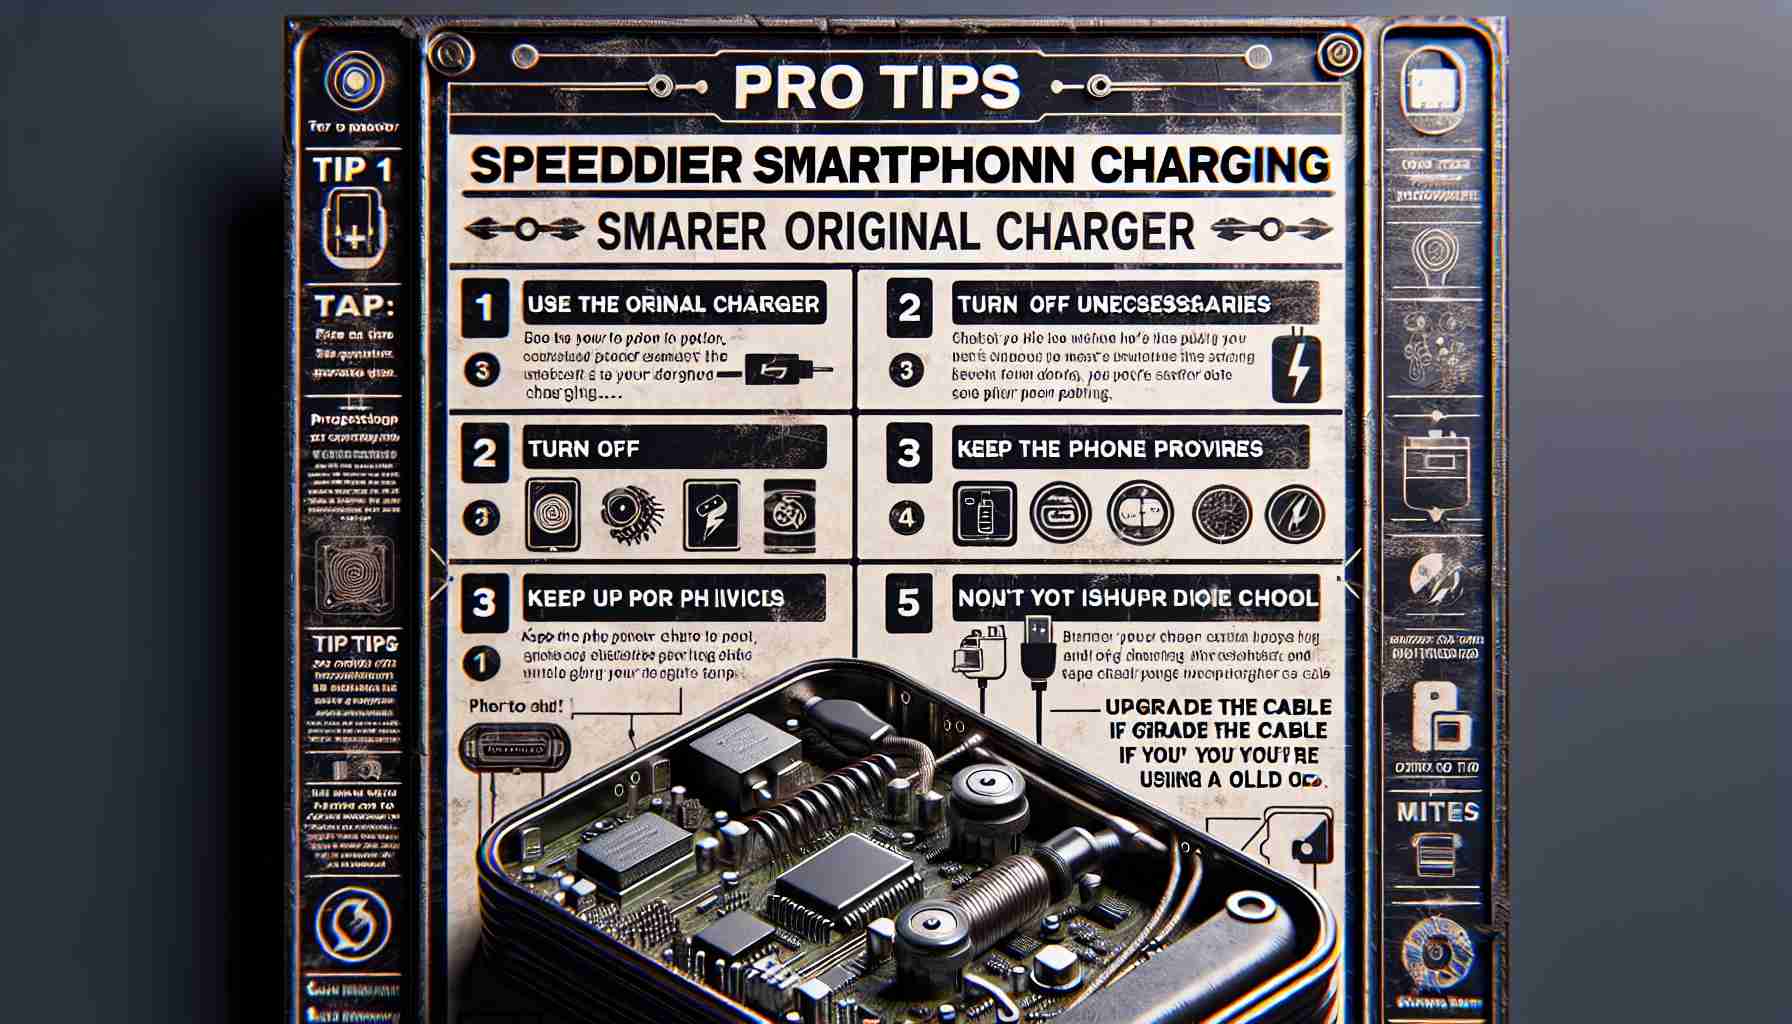 Five Pro Tips for Speedier Smartphone Charging